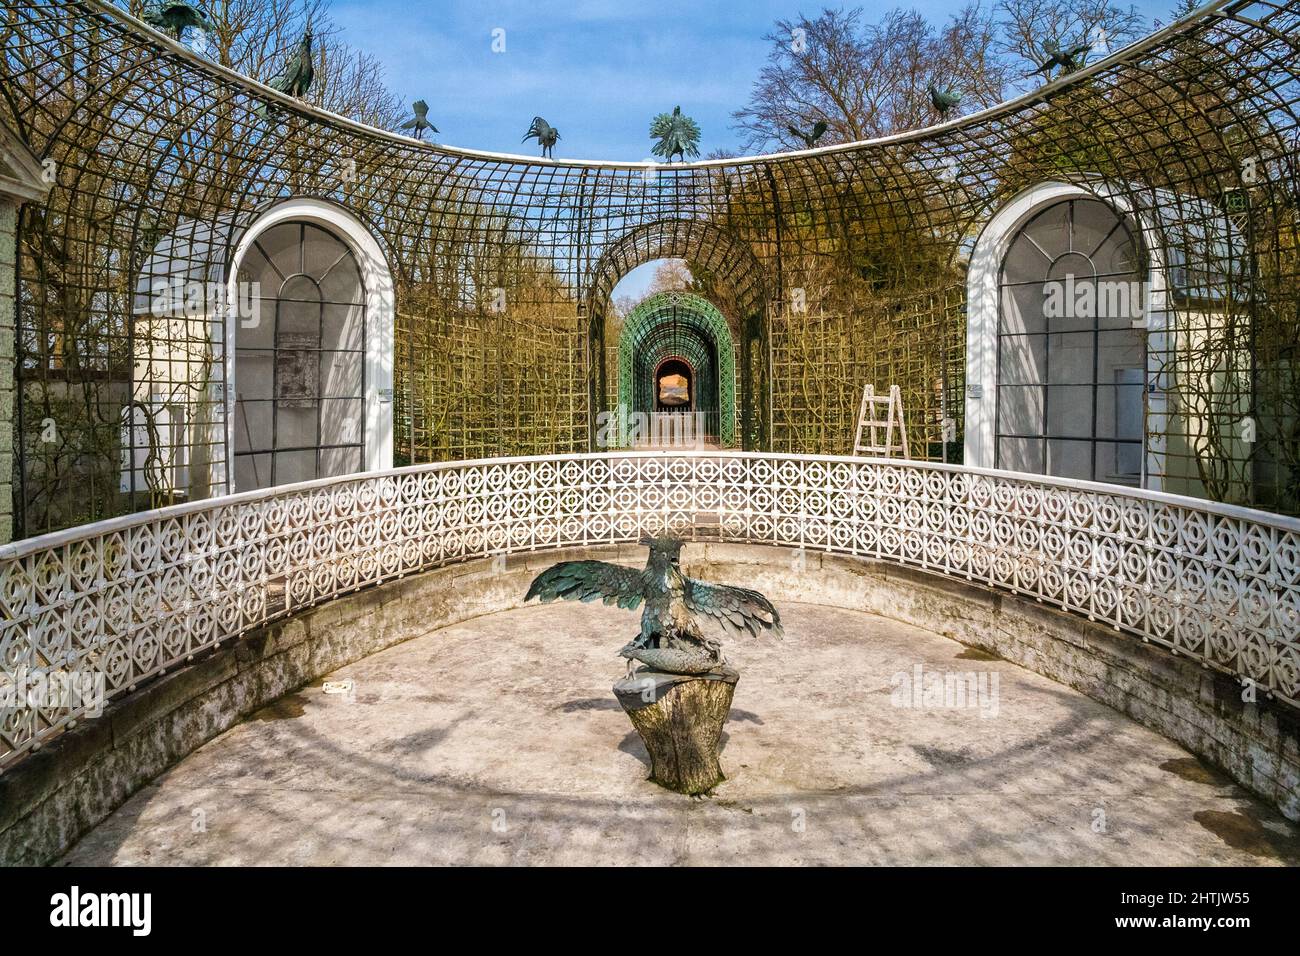 Great close-up view of the famous waterless fountain with the owl and the water-spouting birds with view to the Perspective trellis arch in the... Stock Photo